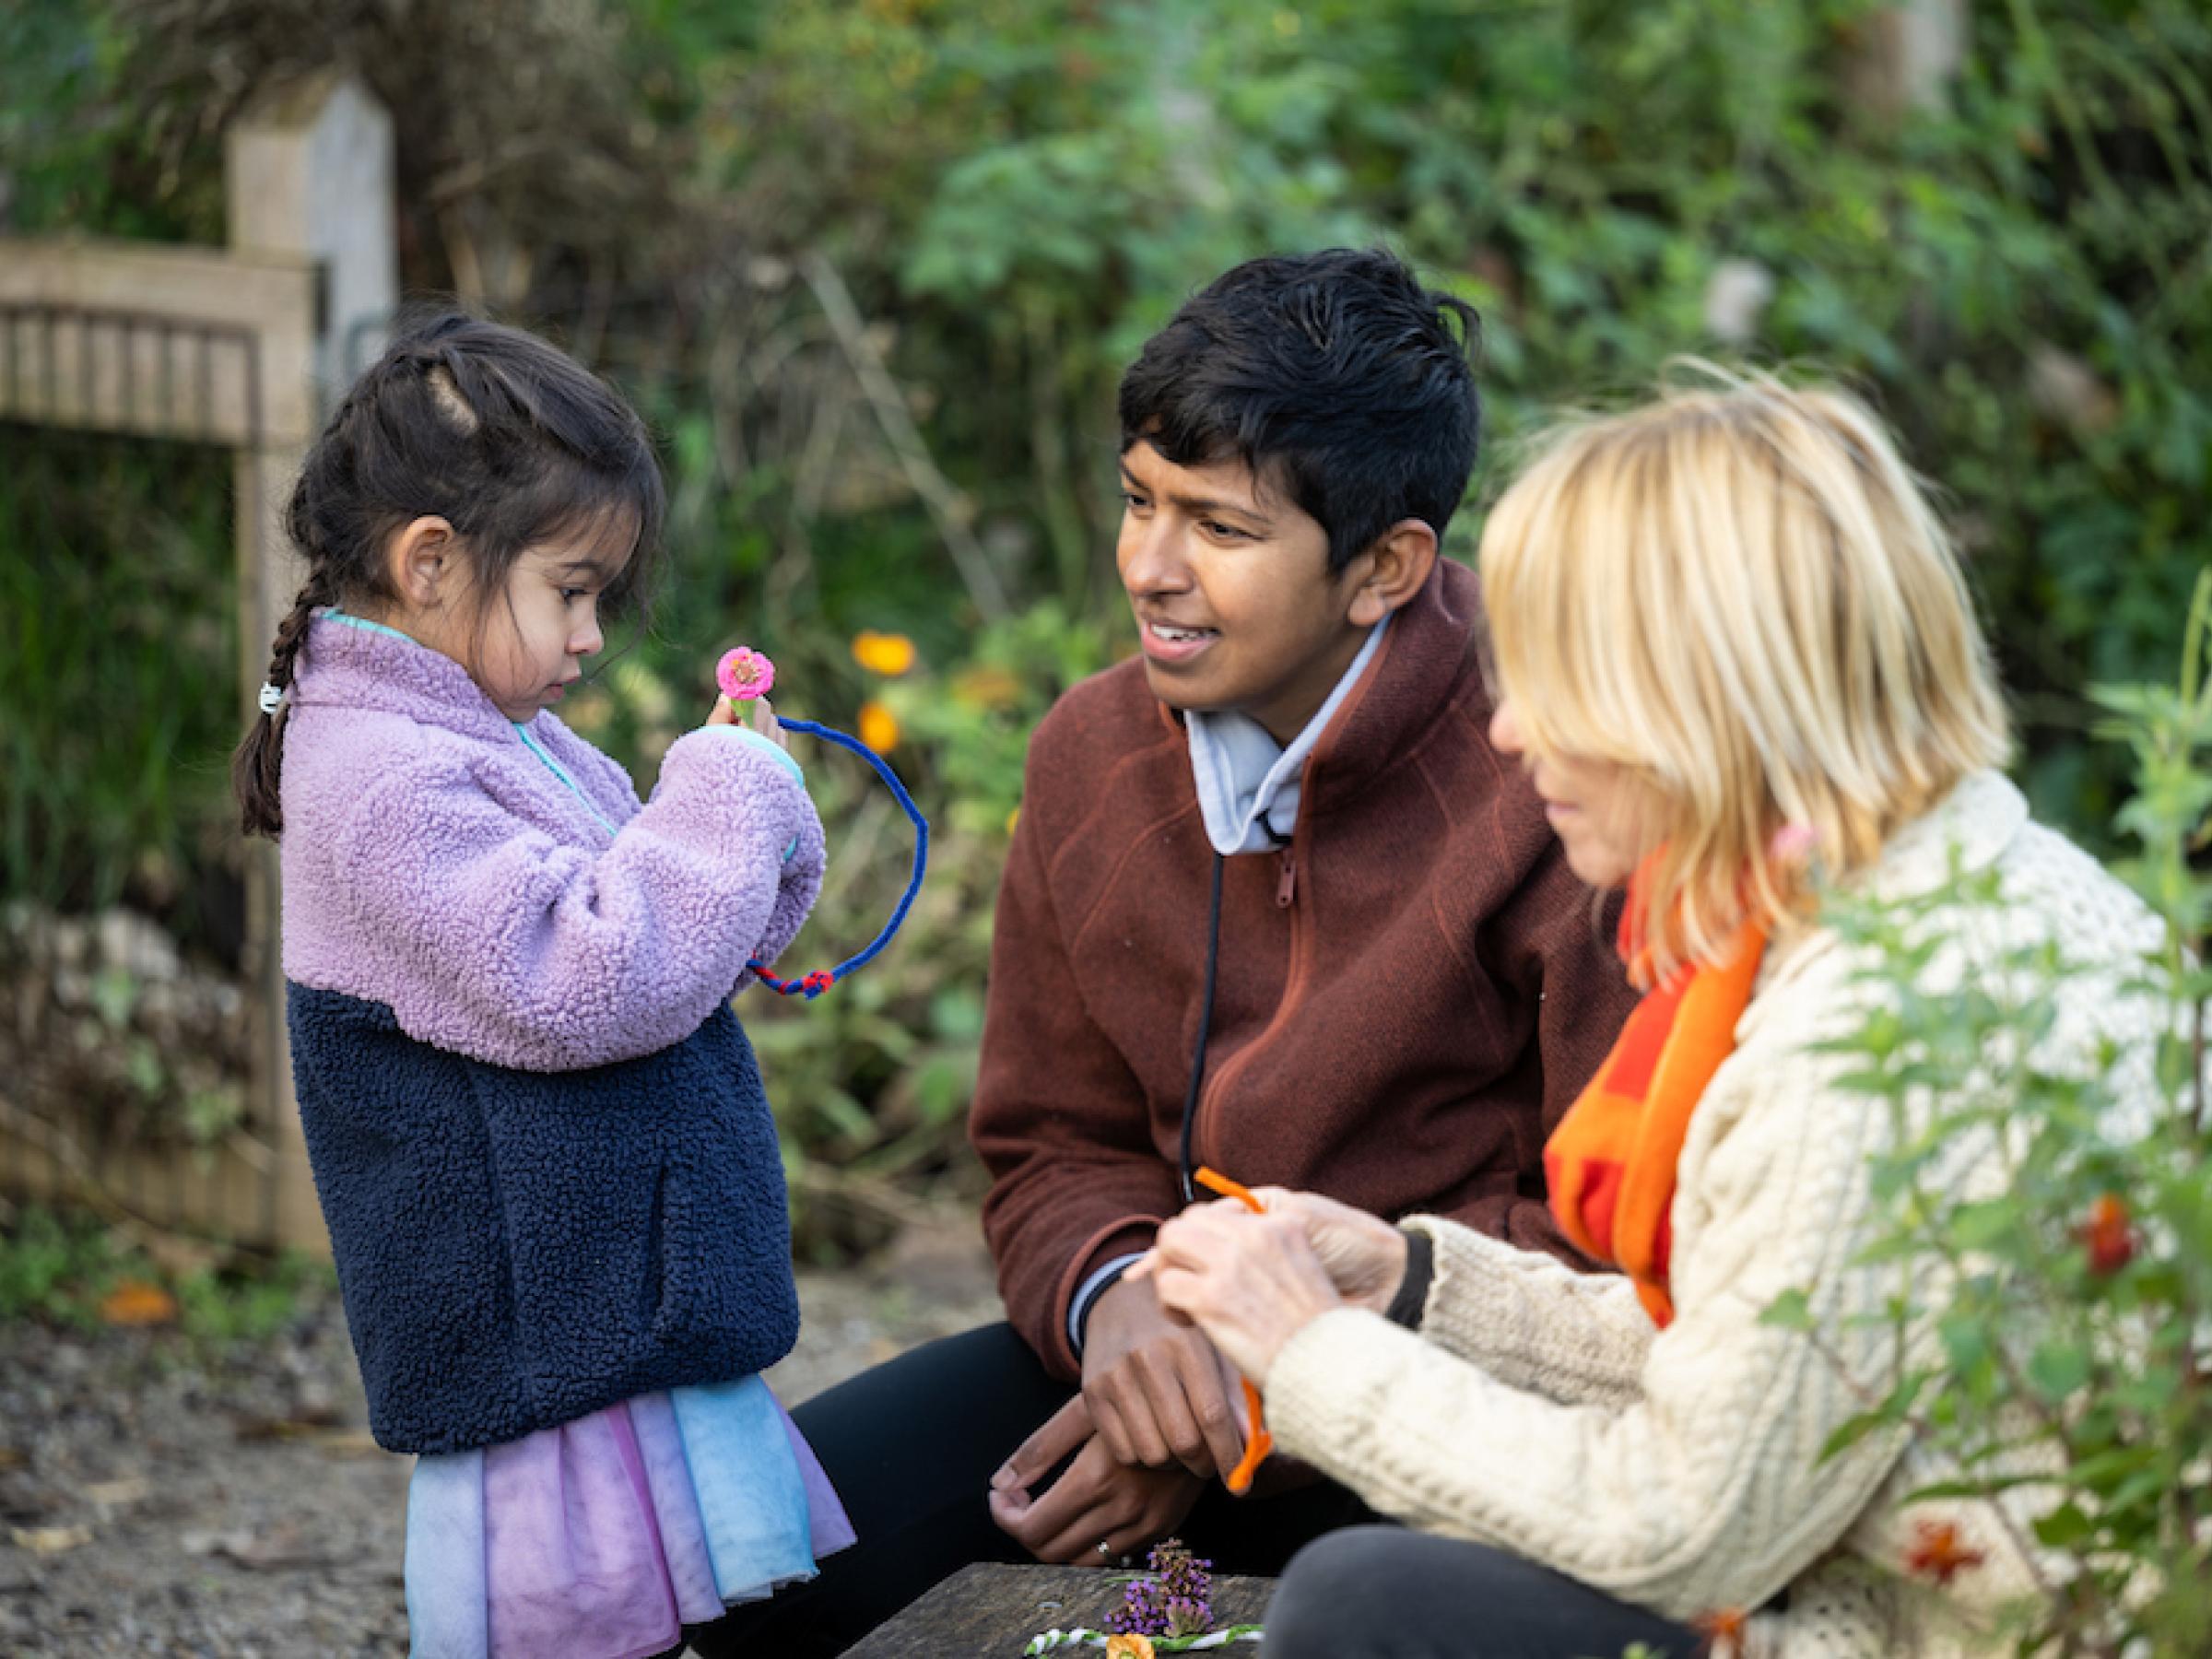 A child showing a small flower to two adults